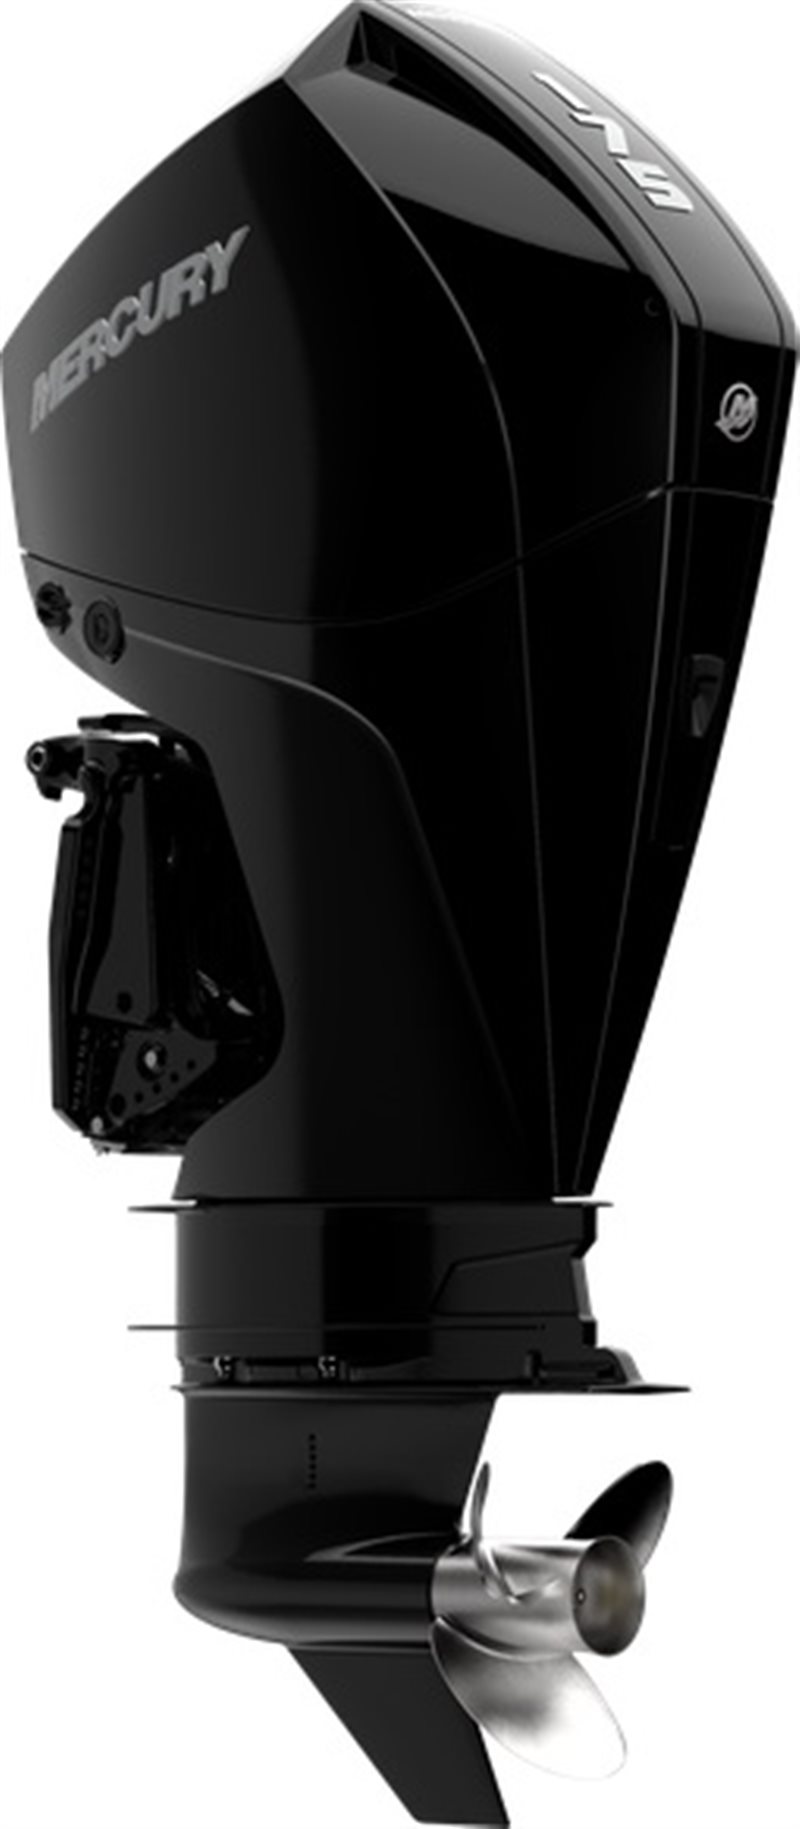 2020 Mercury Outboard Fourstroke 175 - 300 200 HP at Fort Fremont Marine